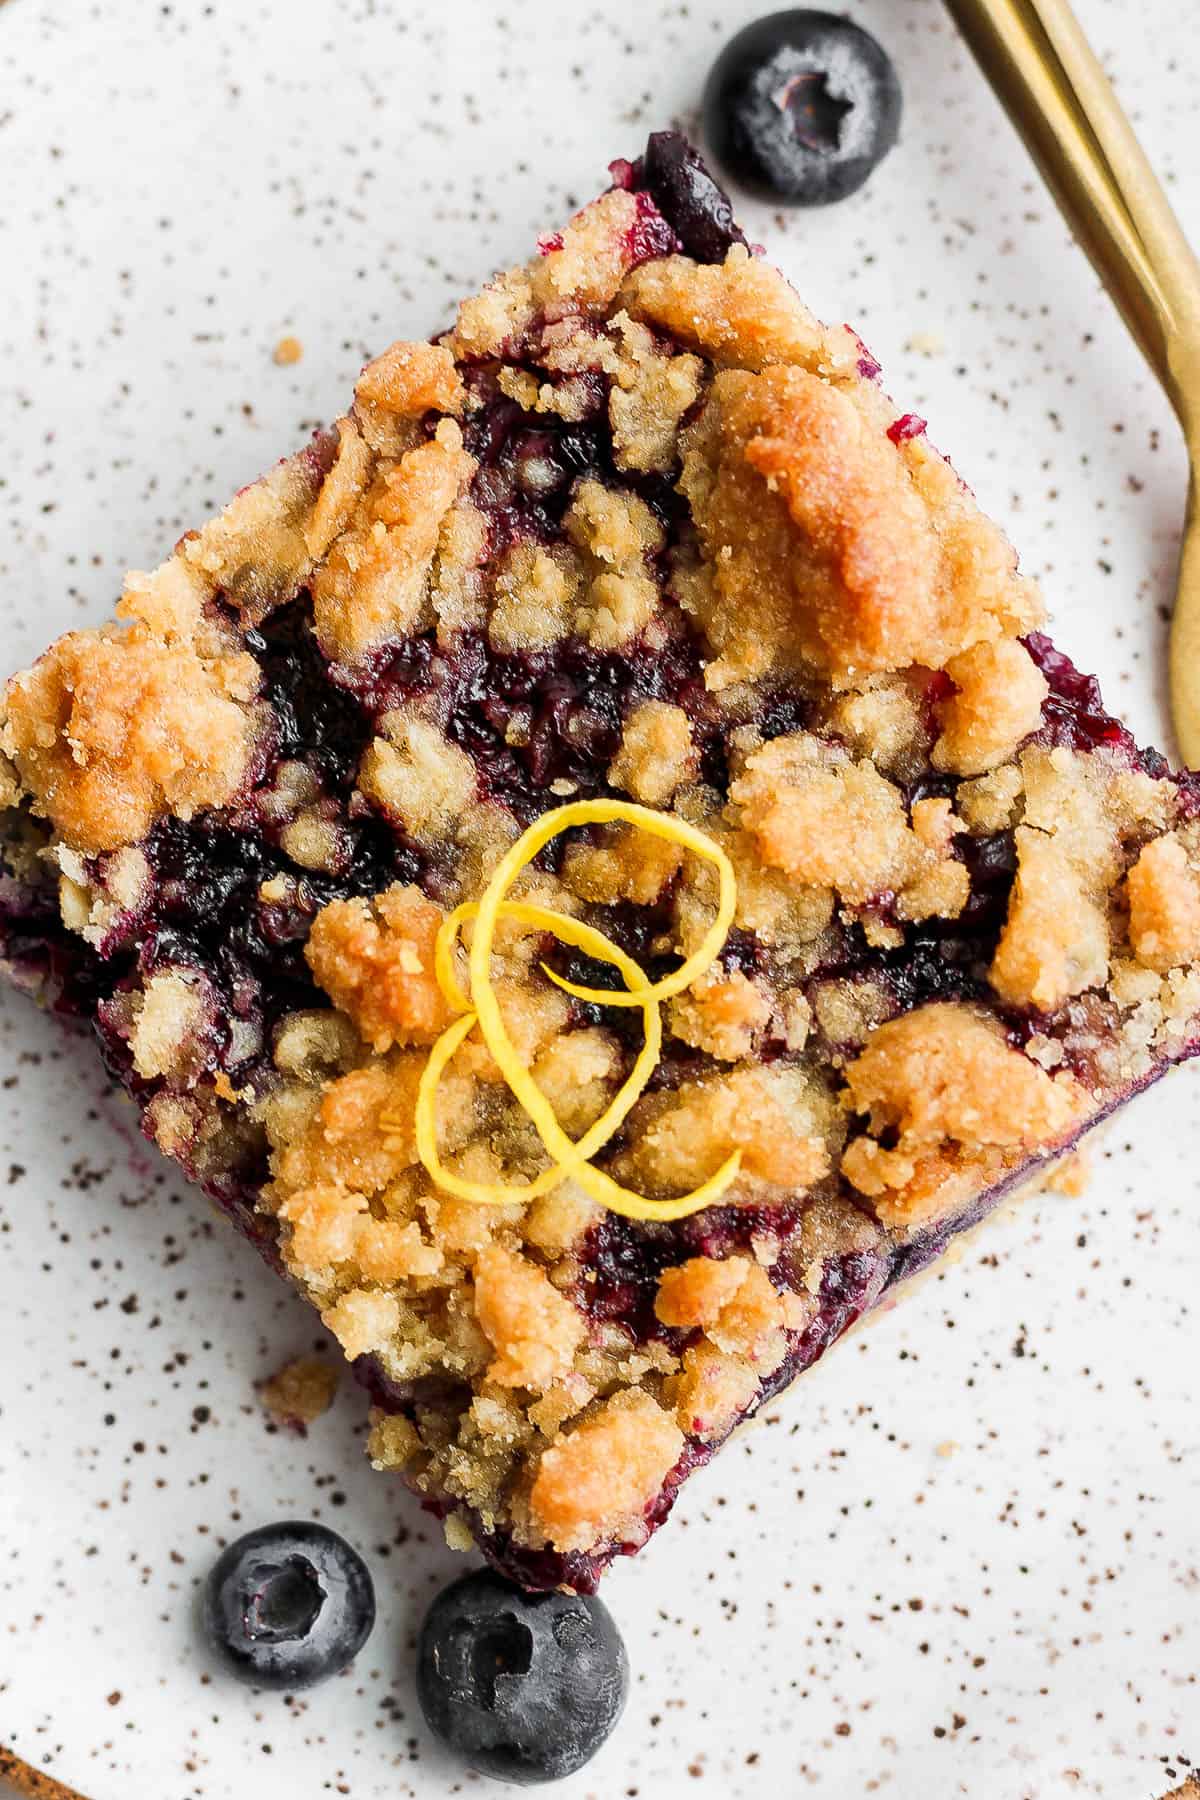 A blueberry crumb bar on a small plate with a fork.